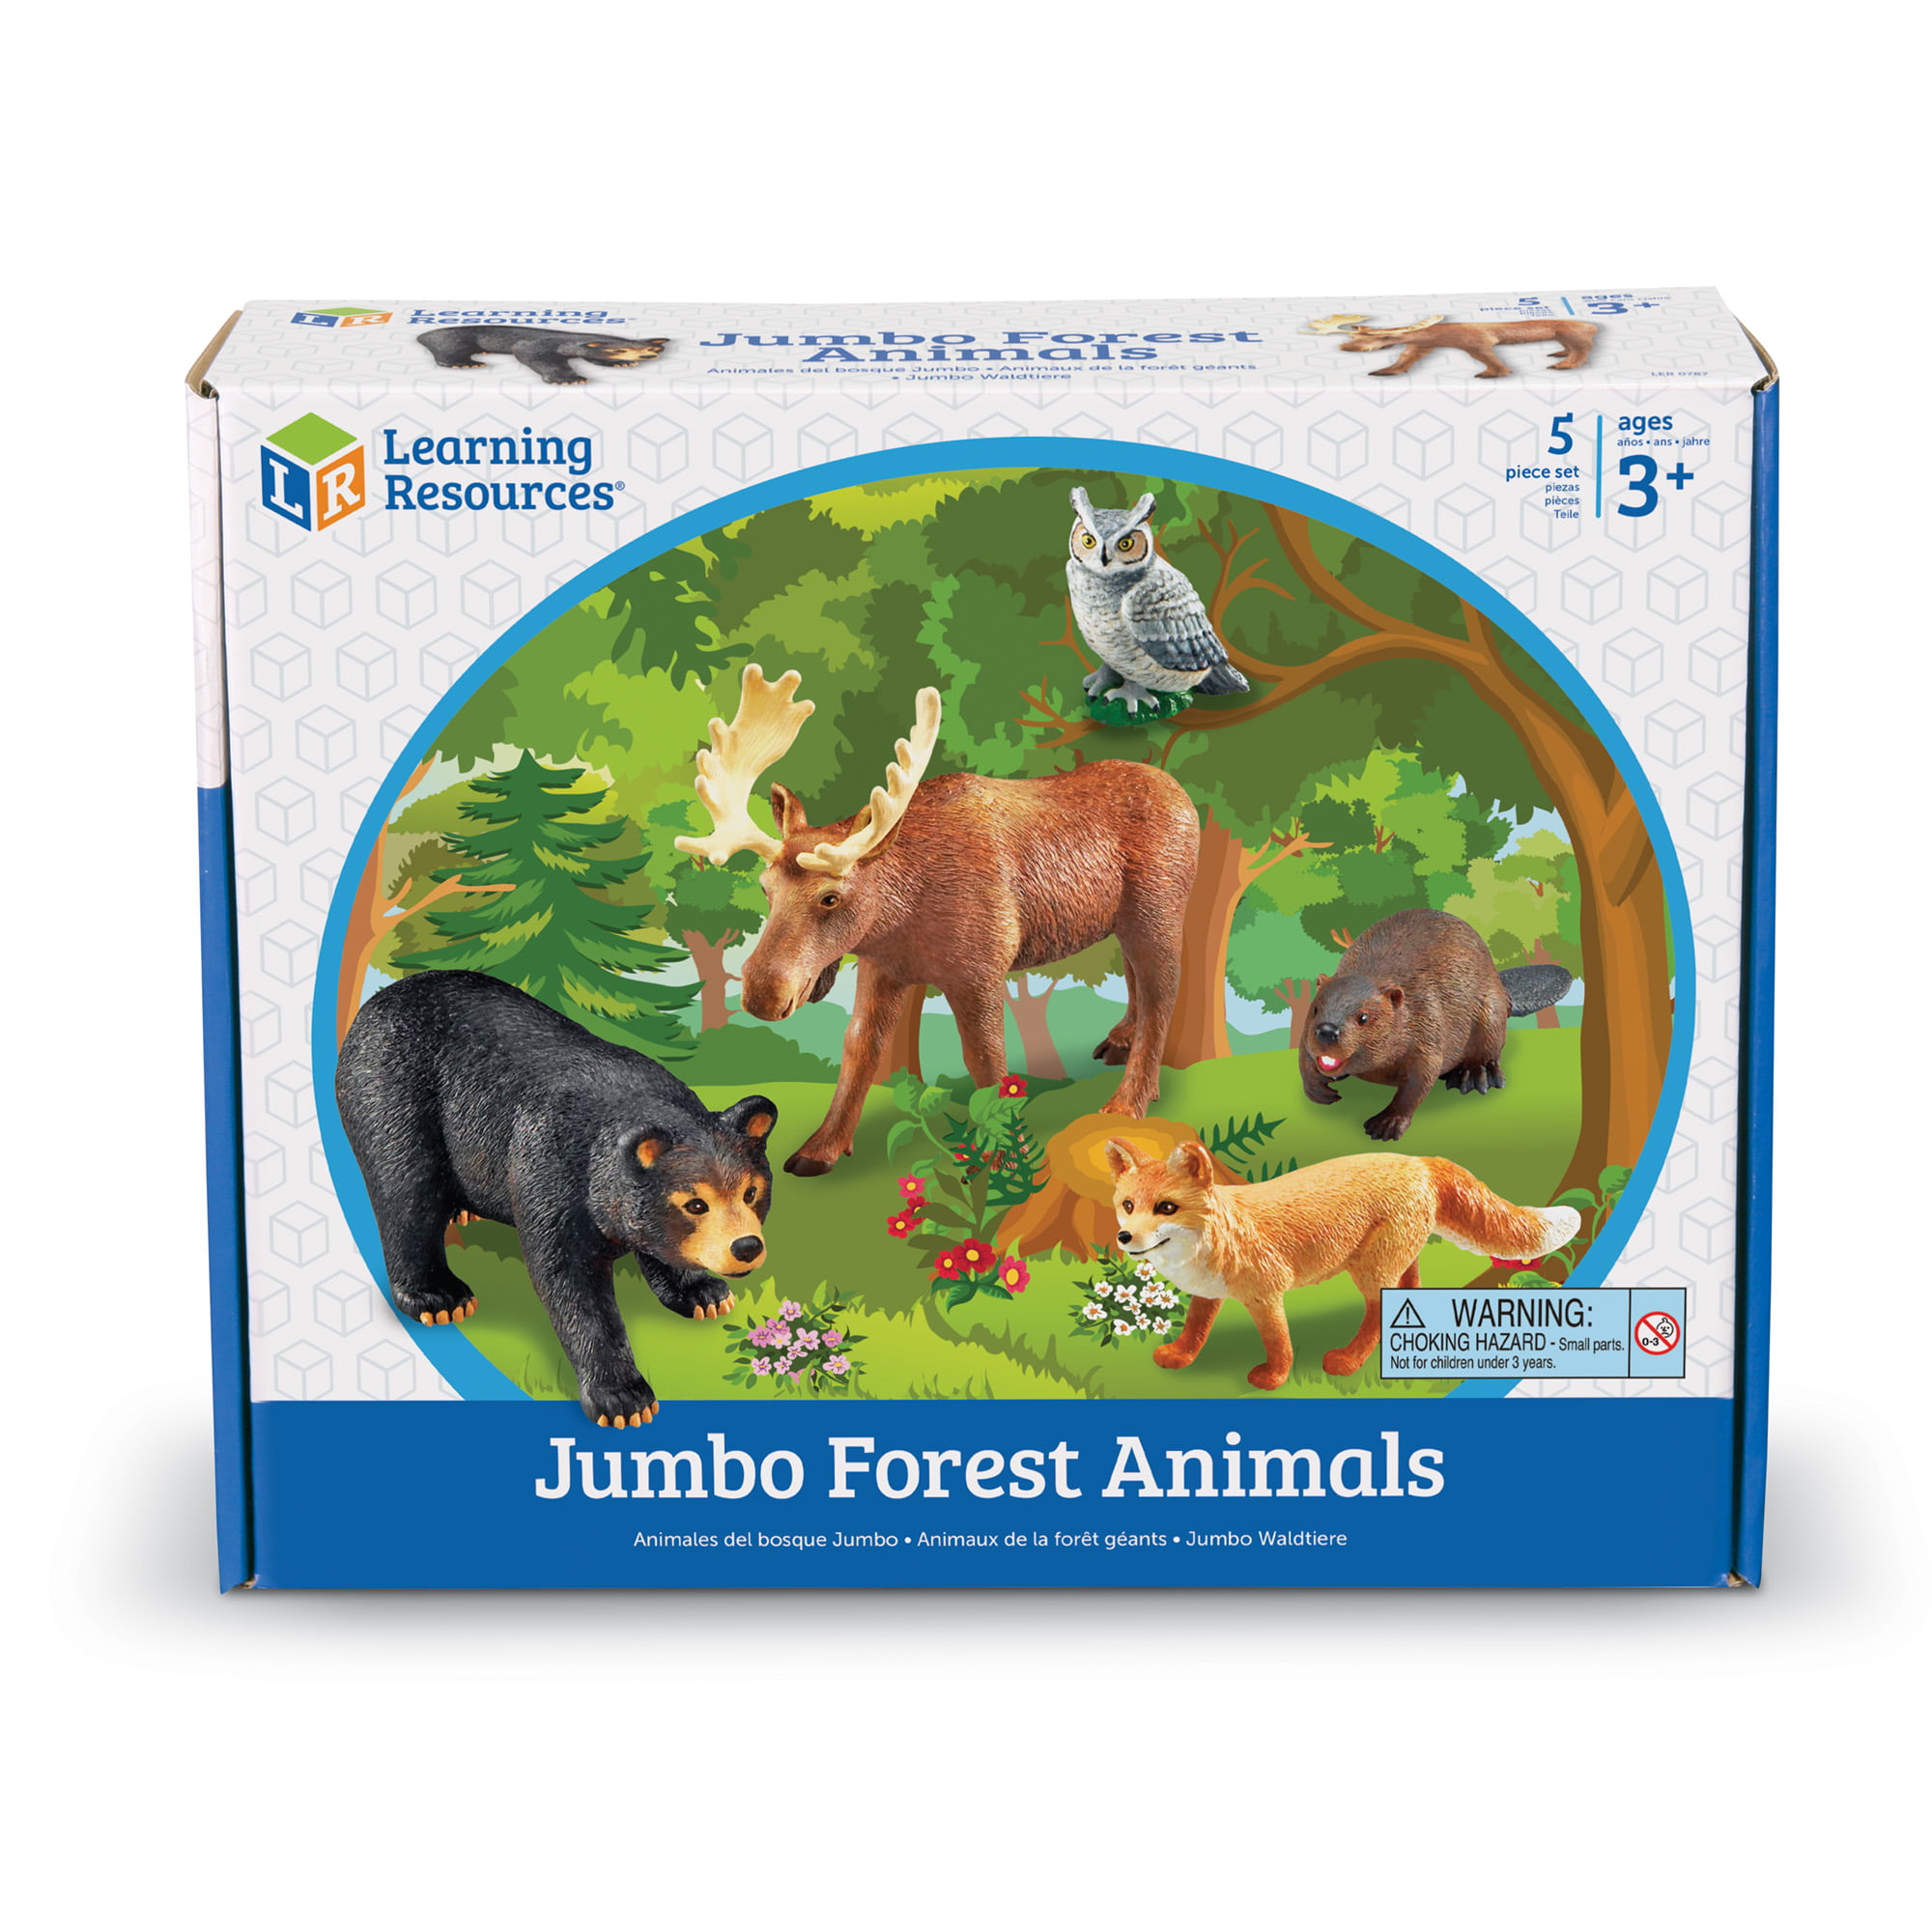 Set of 8 Jumbo Jungle Animal Figures Suitable for Kids 18 Months for sale online 